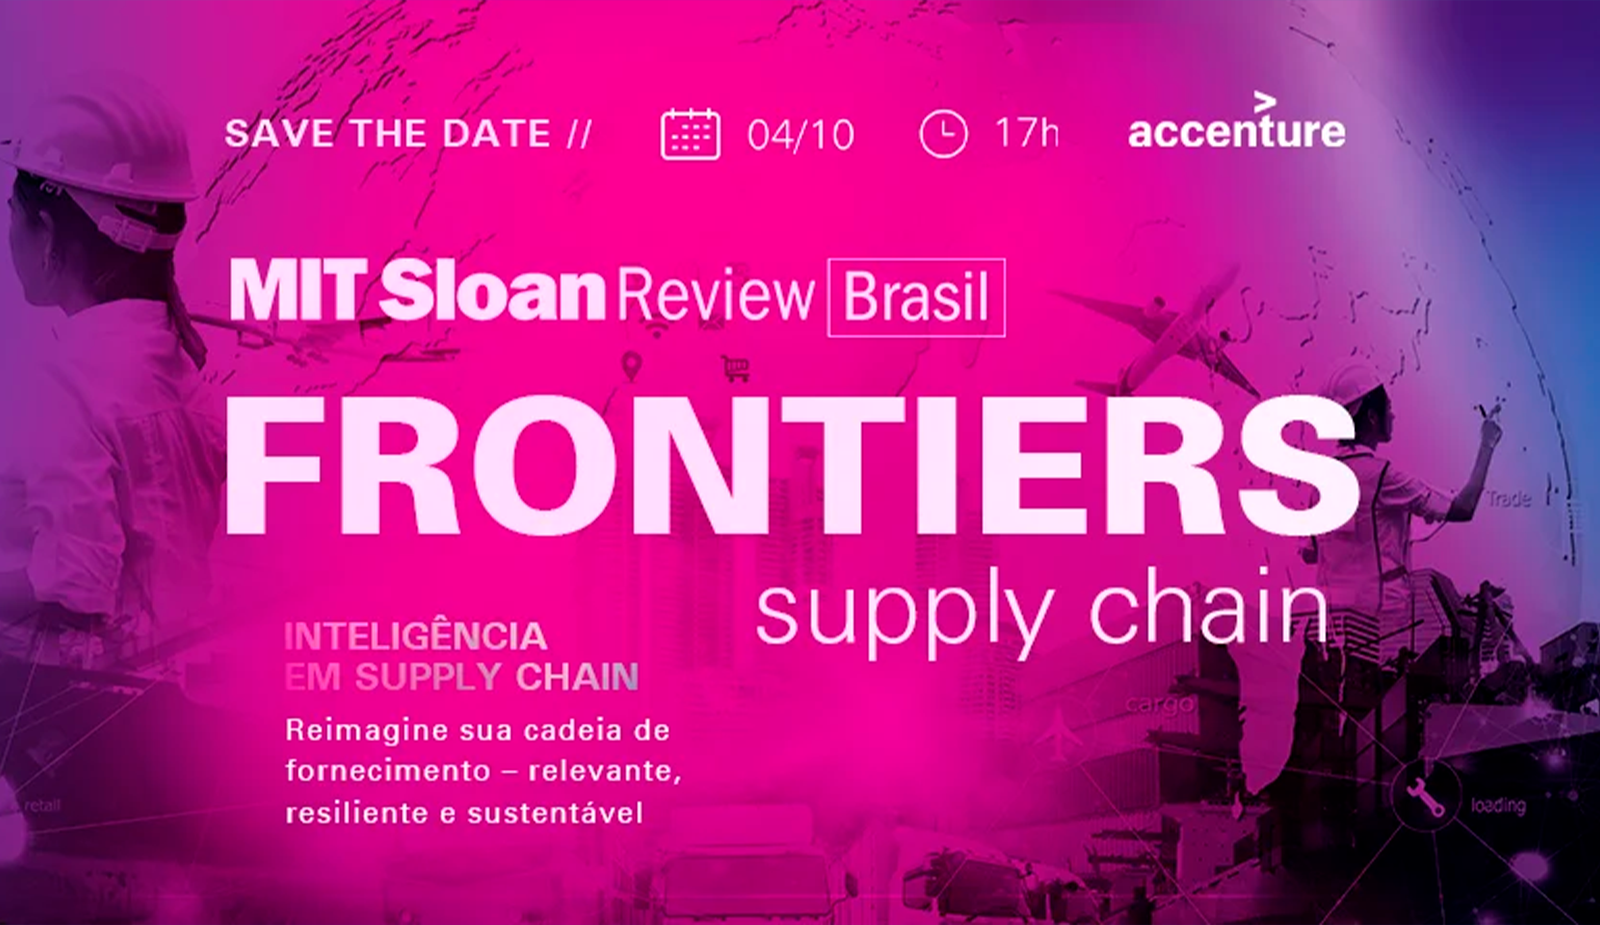 Frontiers: Inteligência em supply chain